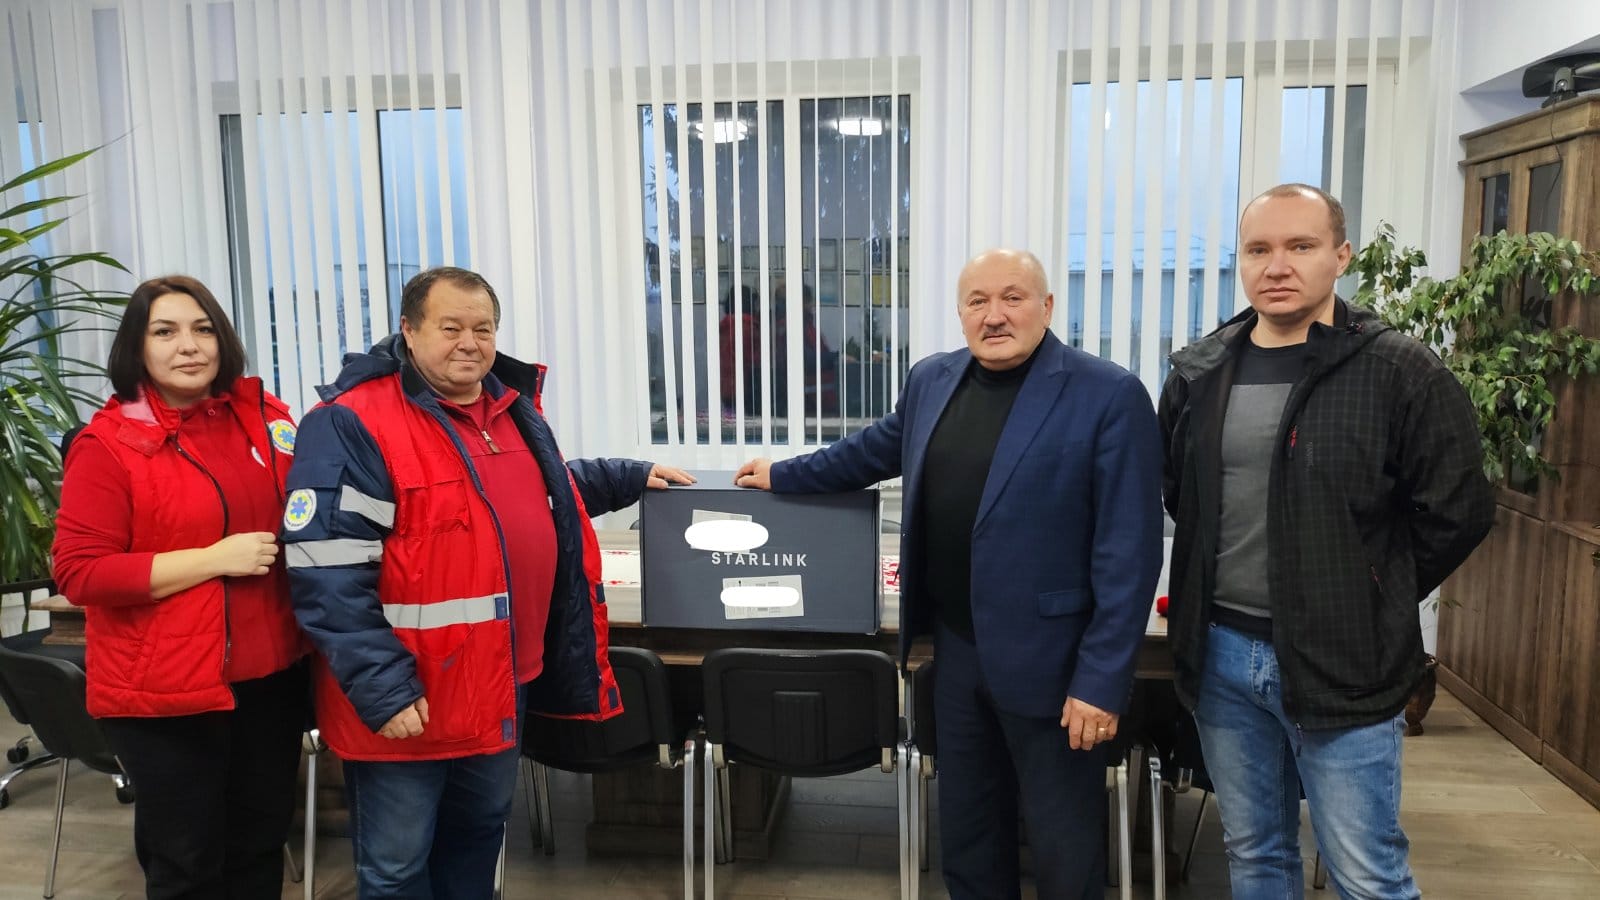 The Head of the Community handing over Starlink to the staff of the emergency medical care department in the town of Kamianka